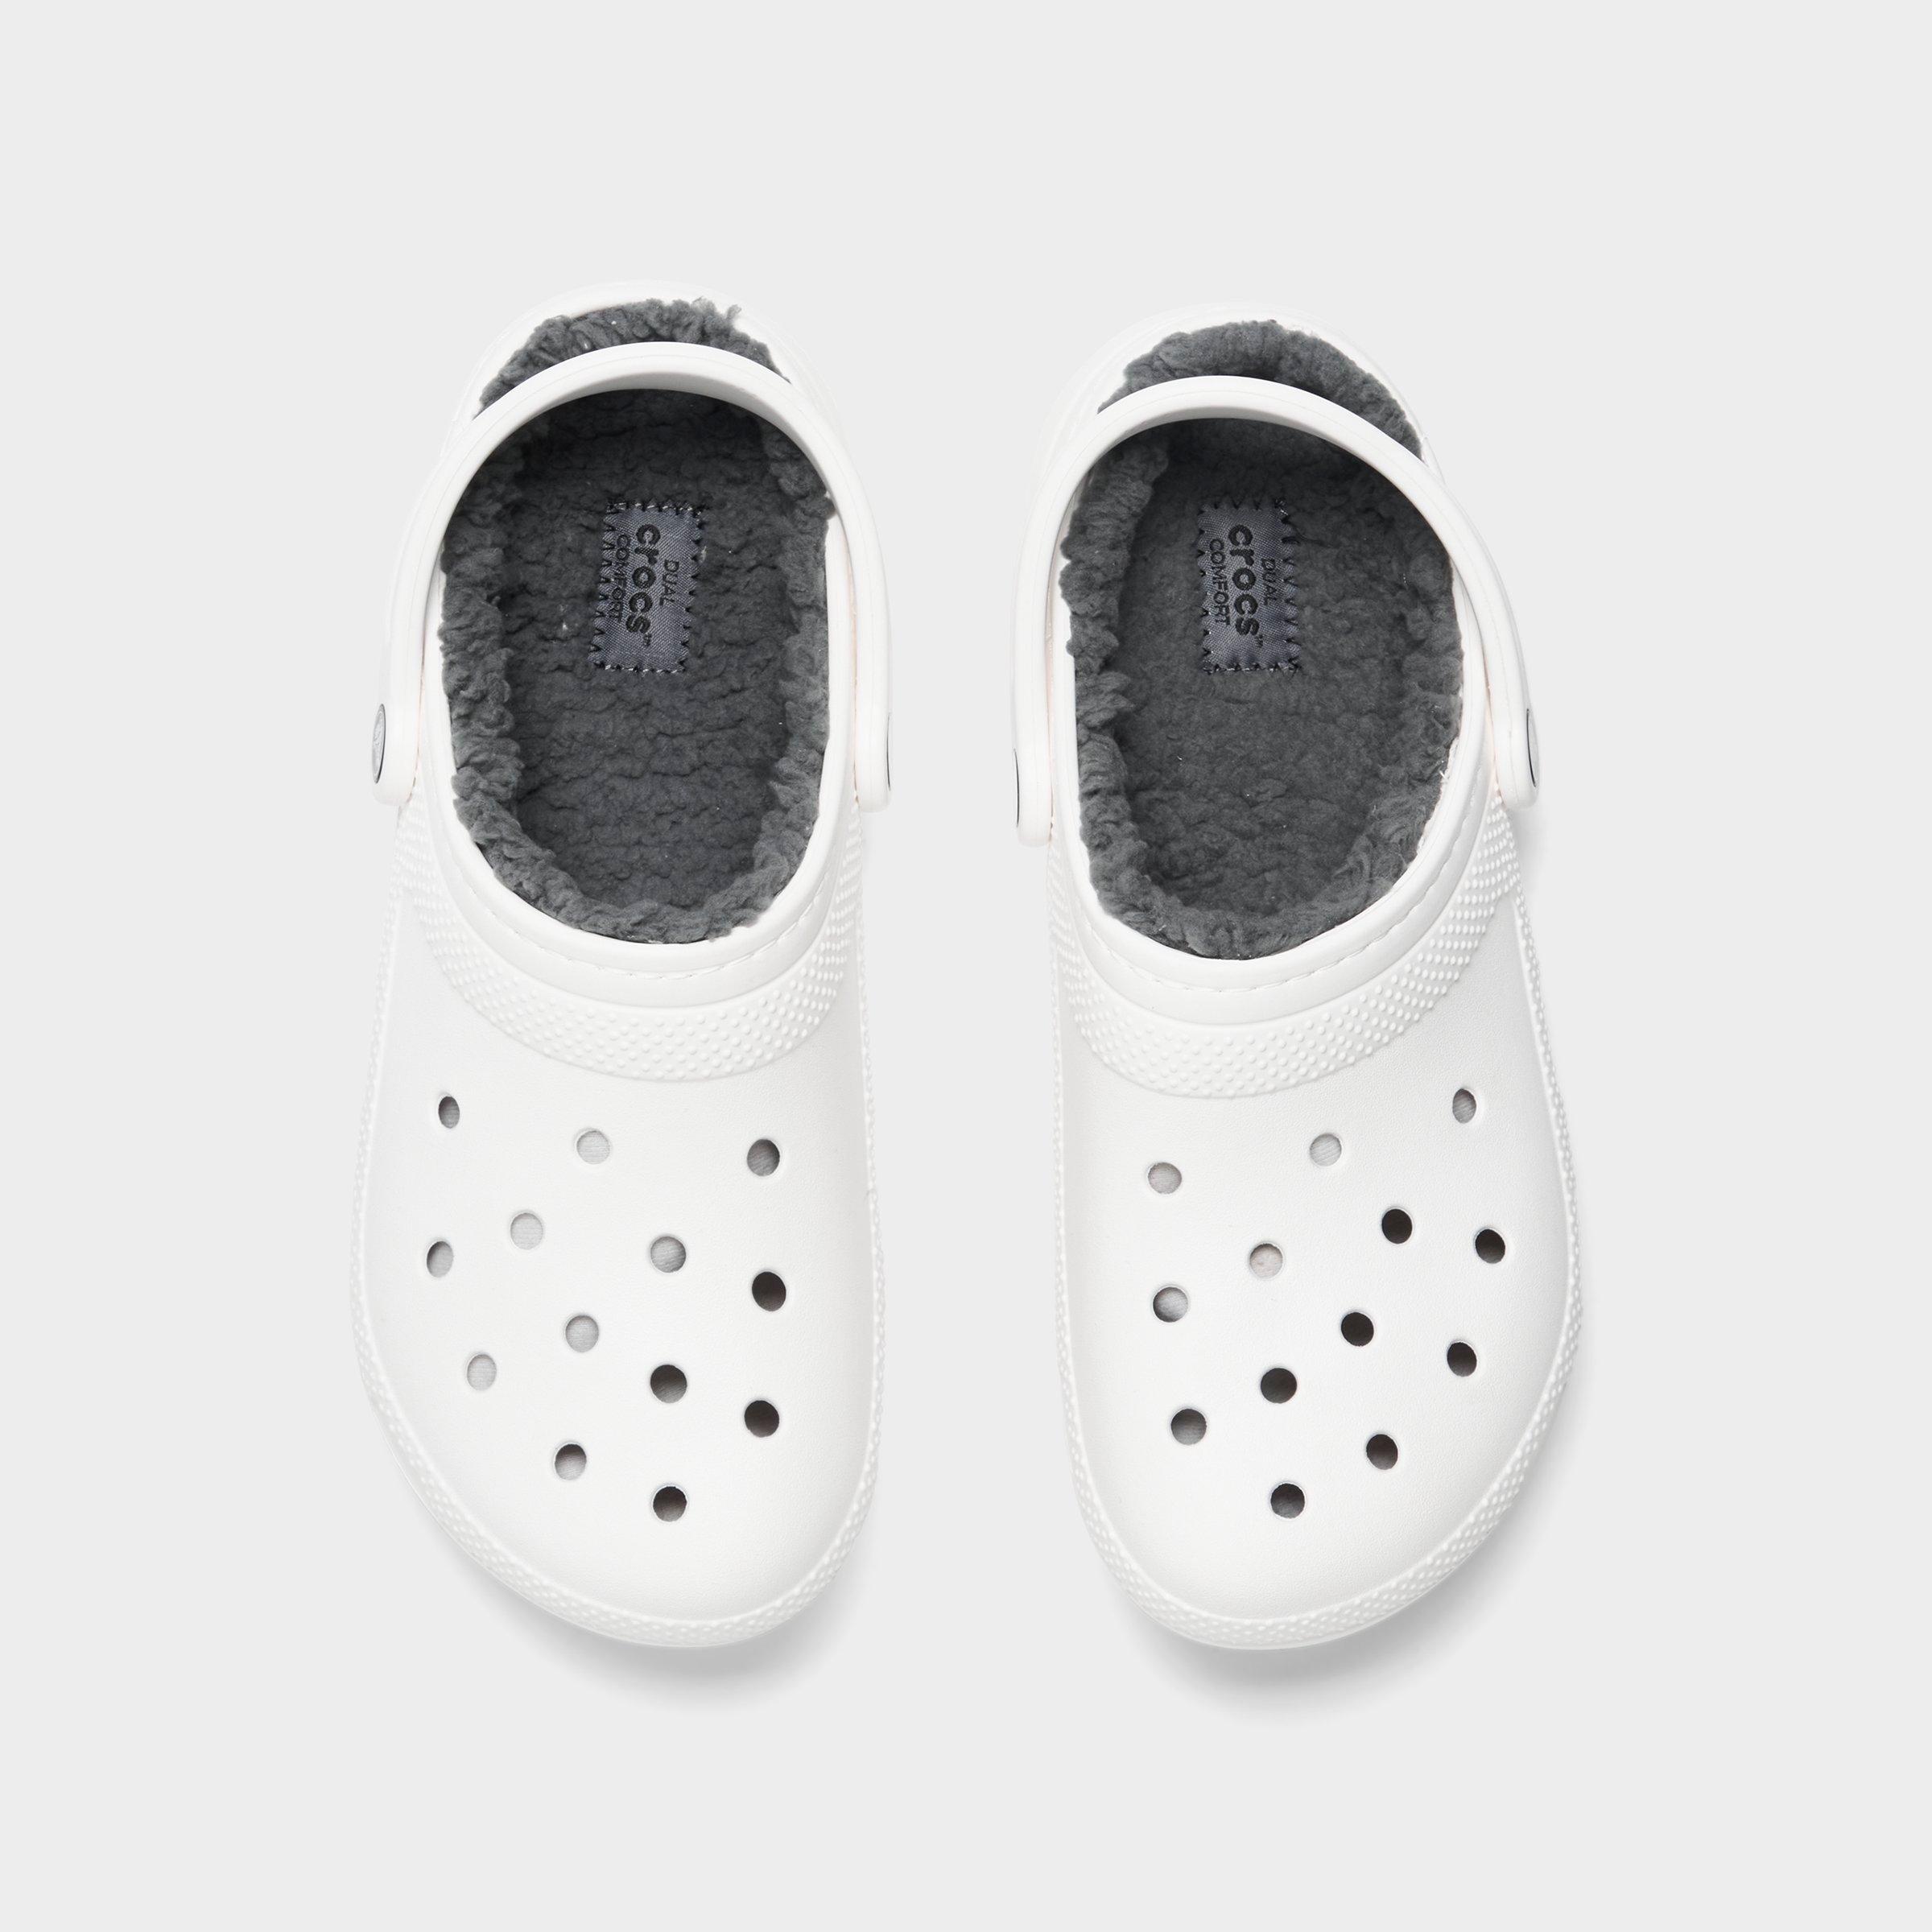 classic lined white crocs